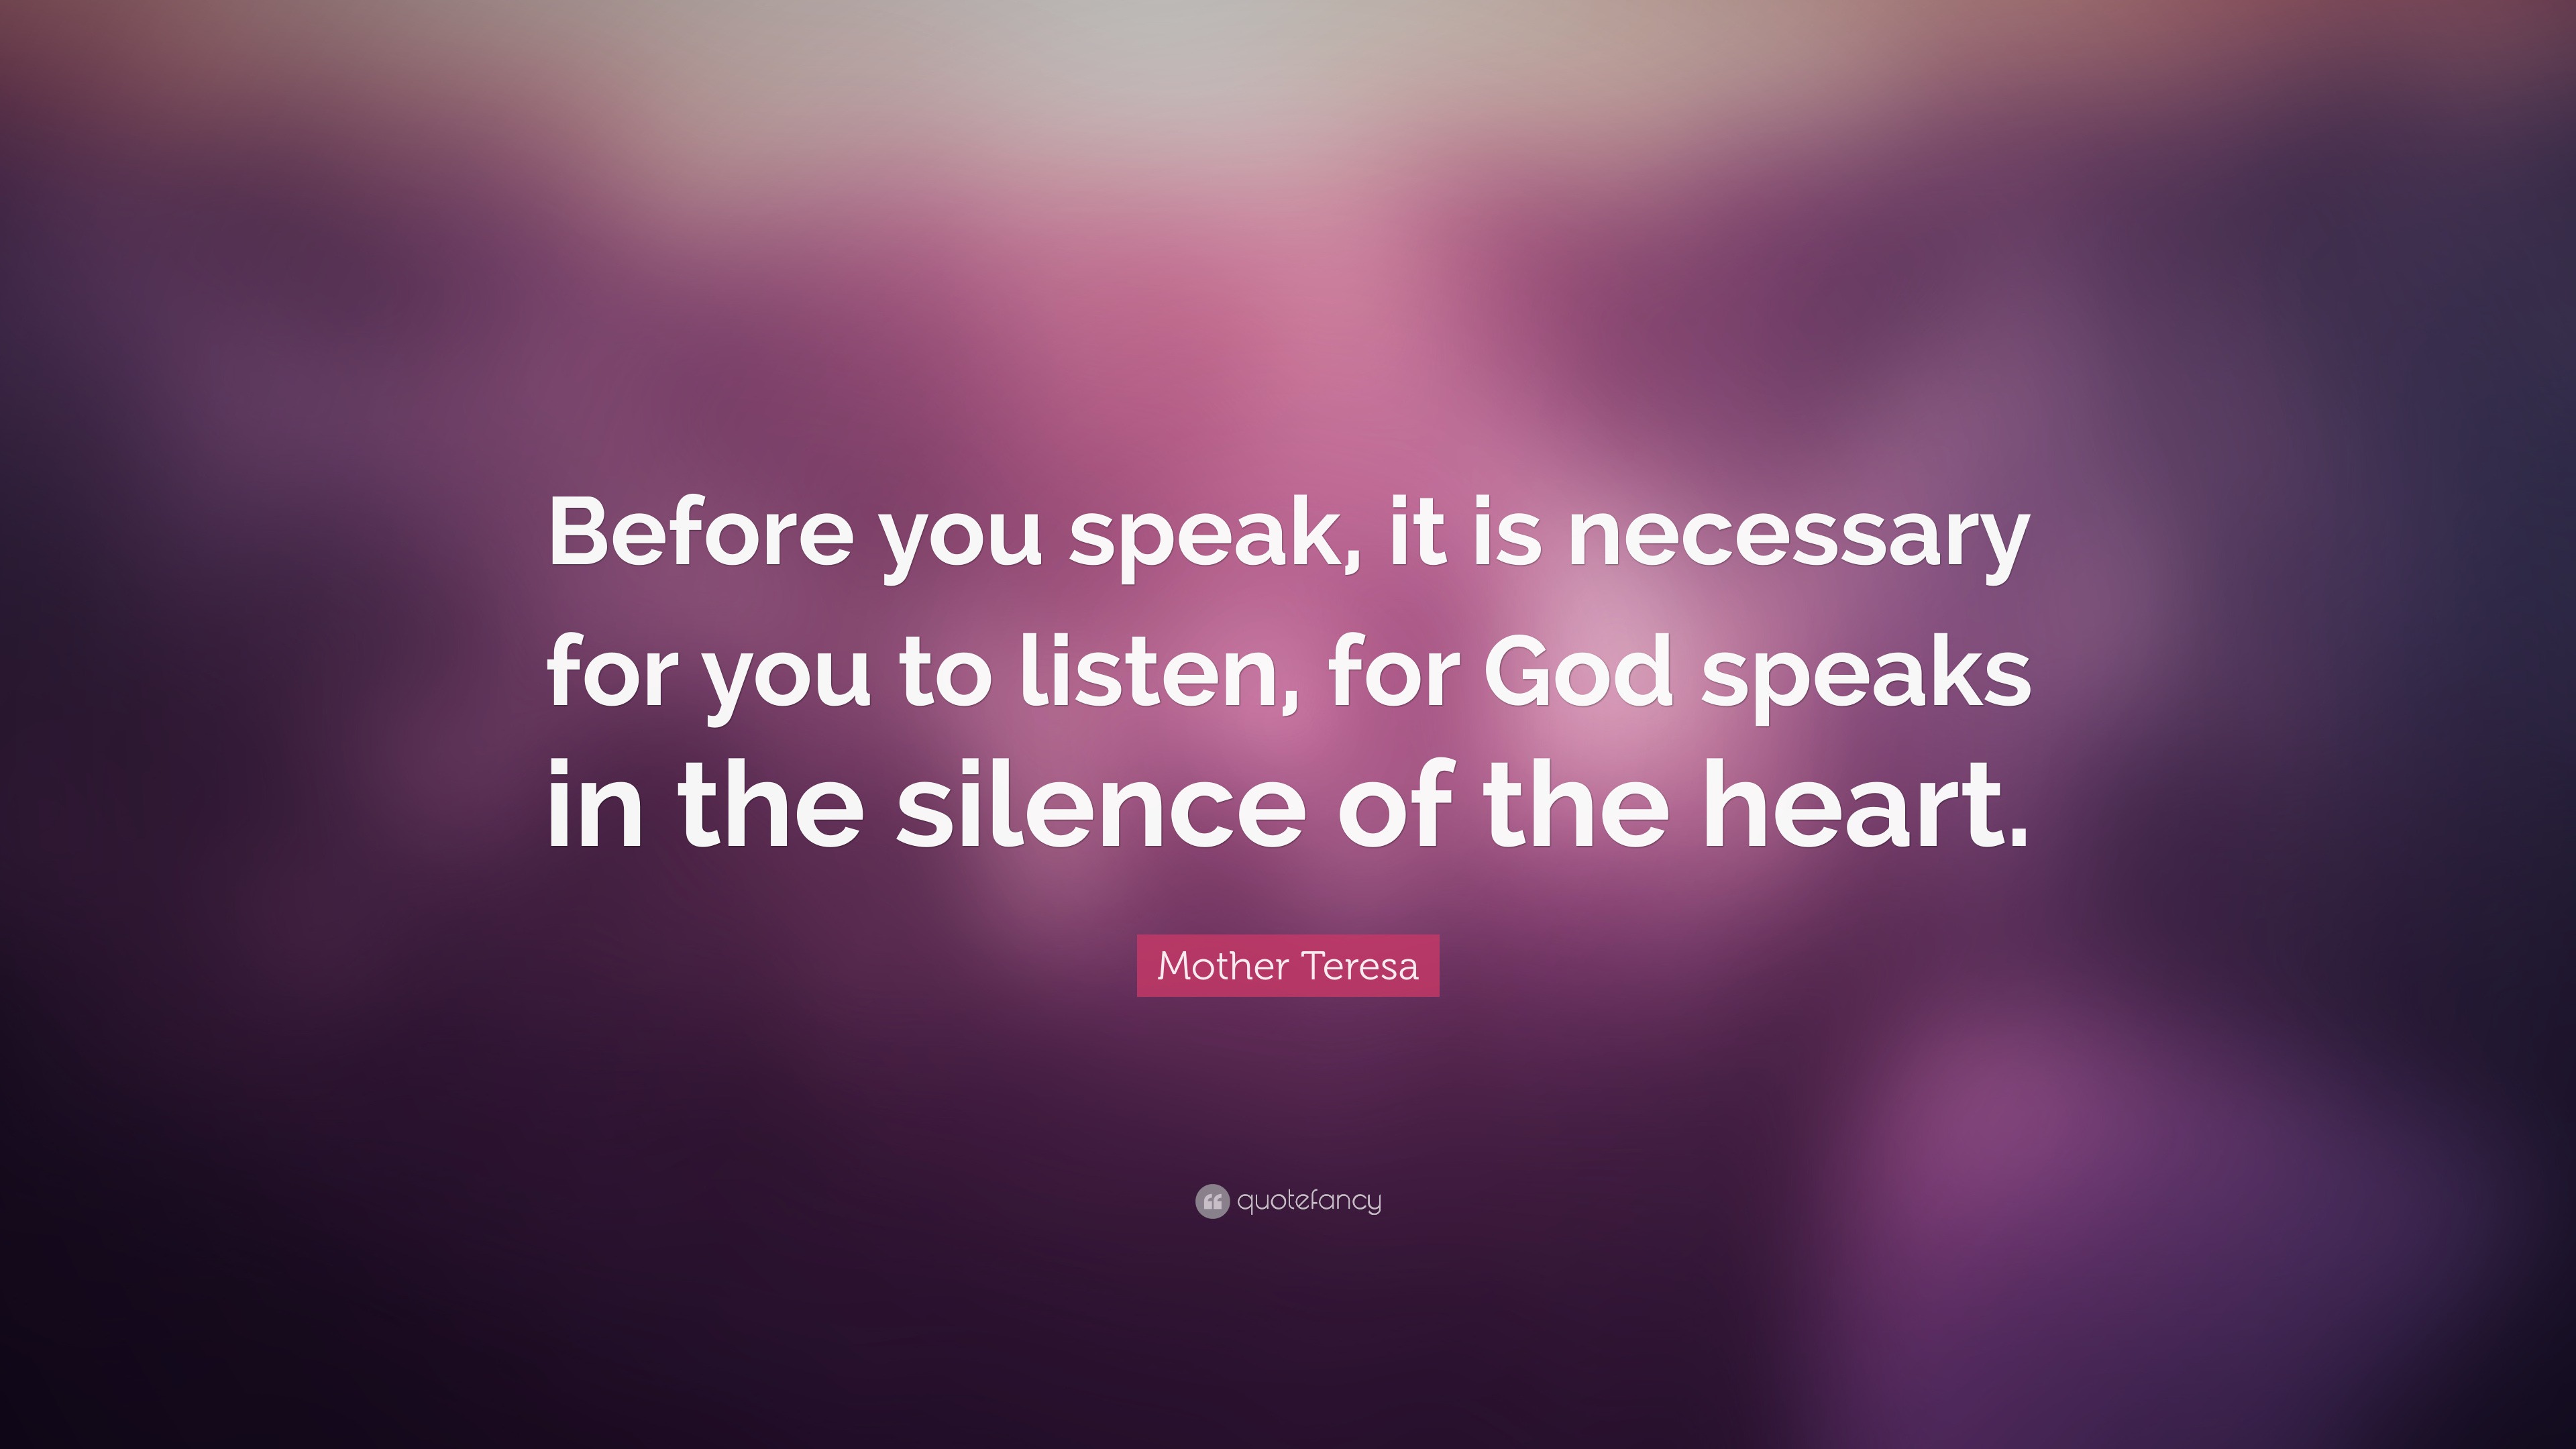 Mother Teresa Quote: “Before you speak, it is necessary for you to ...